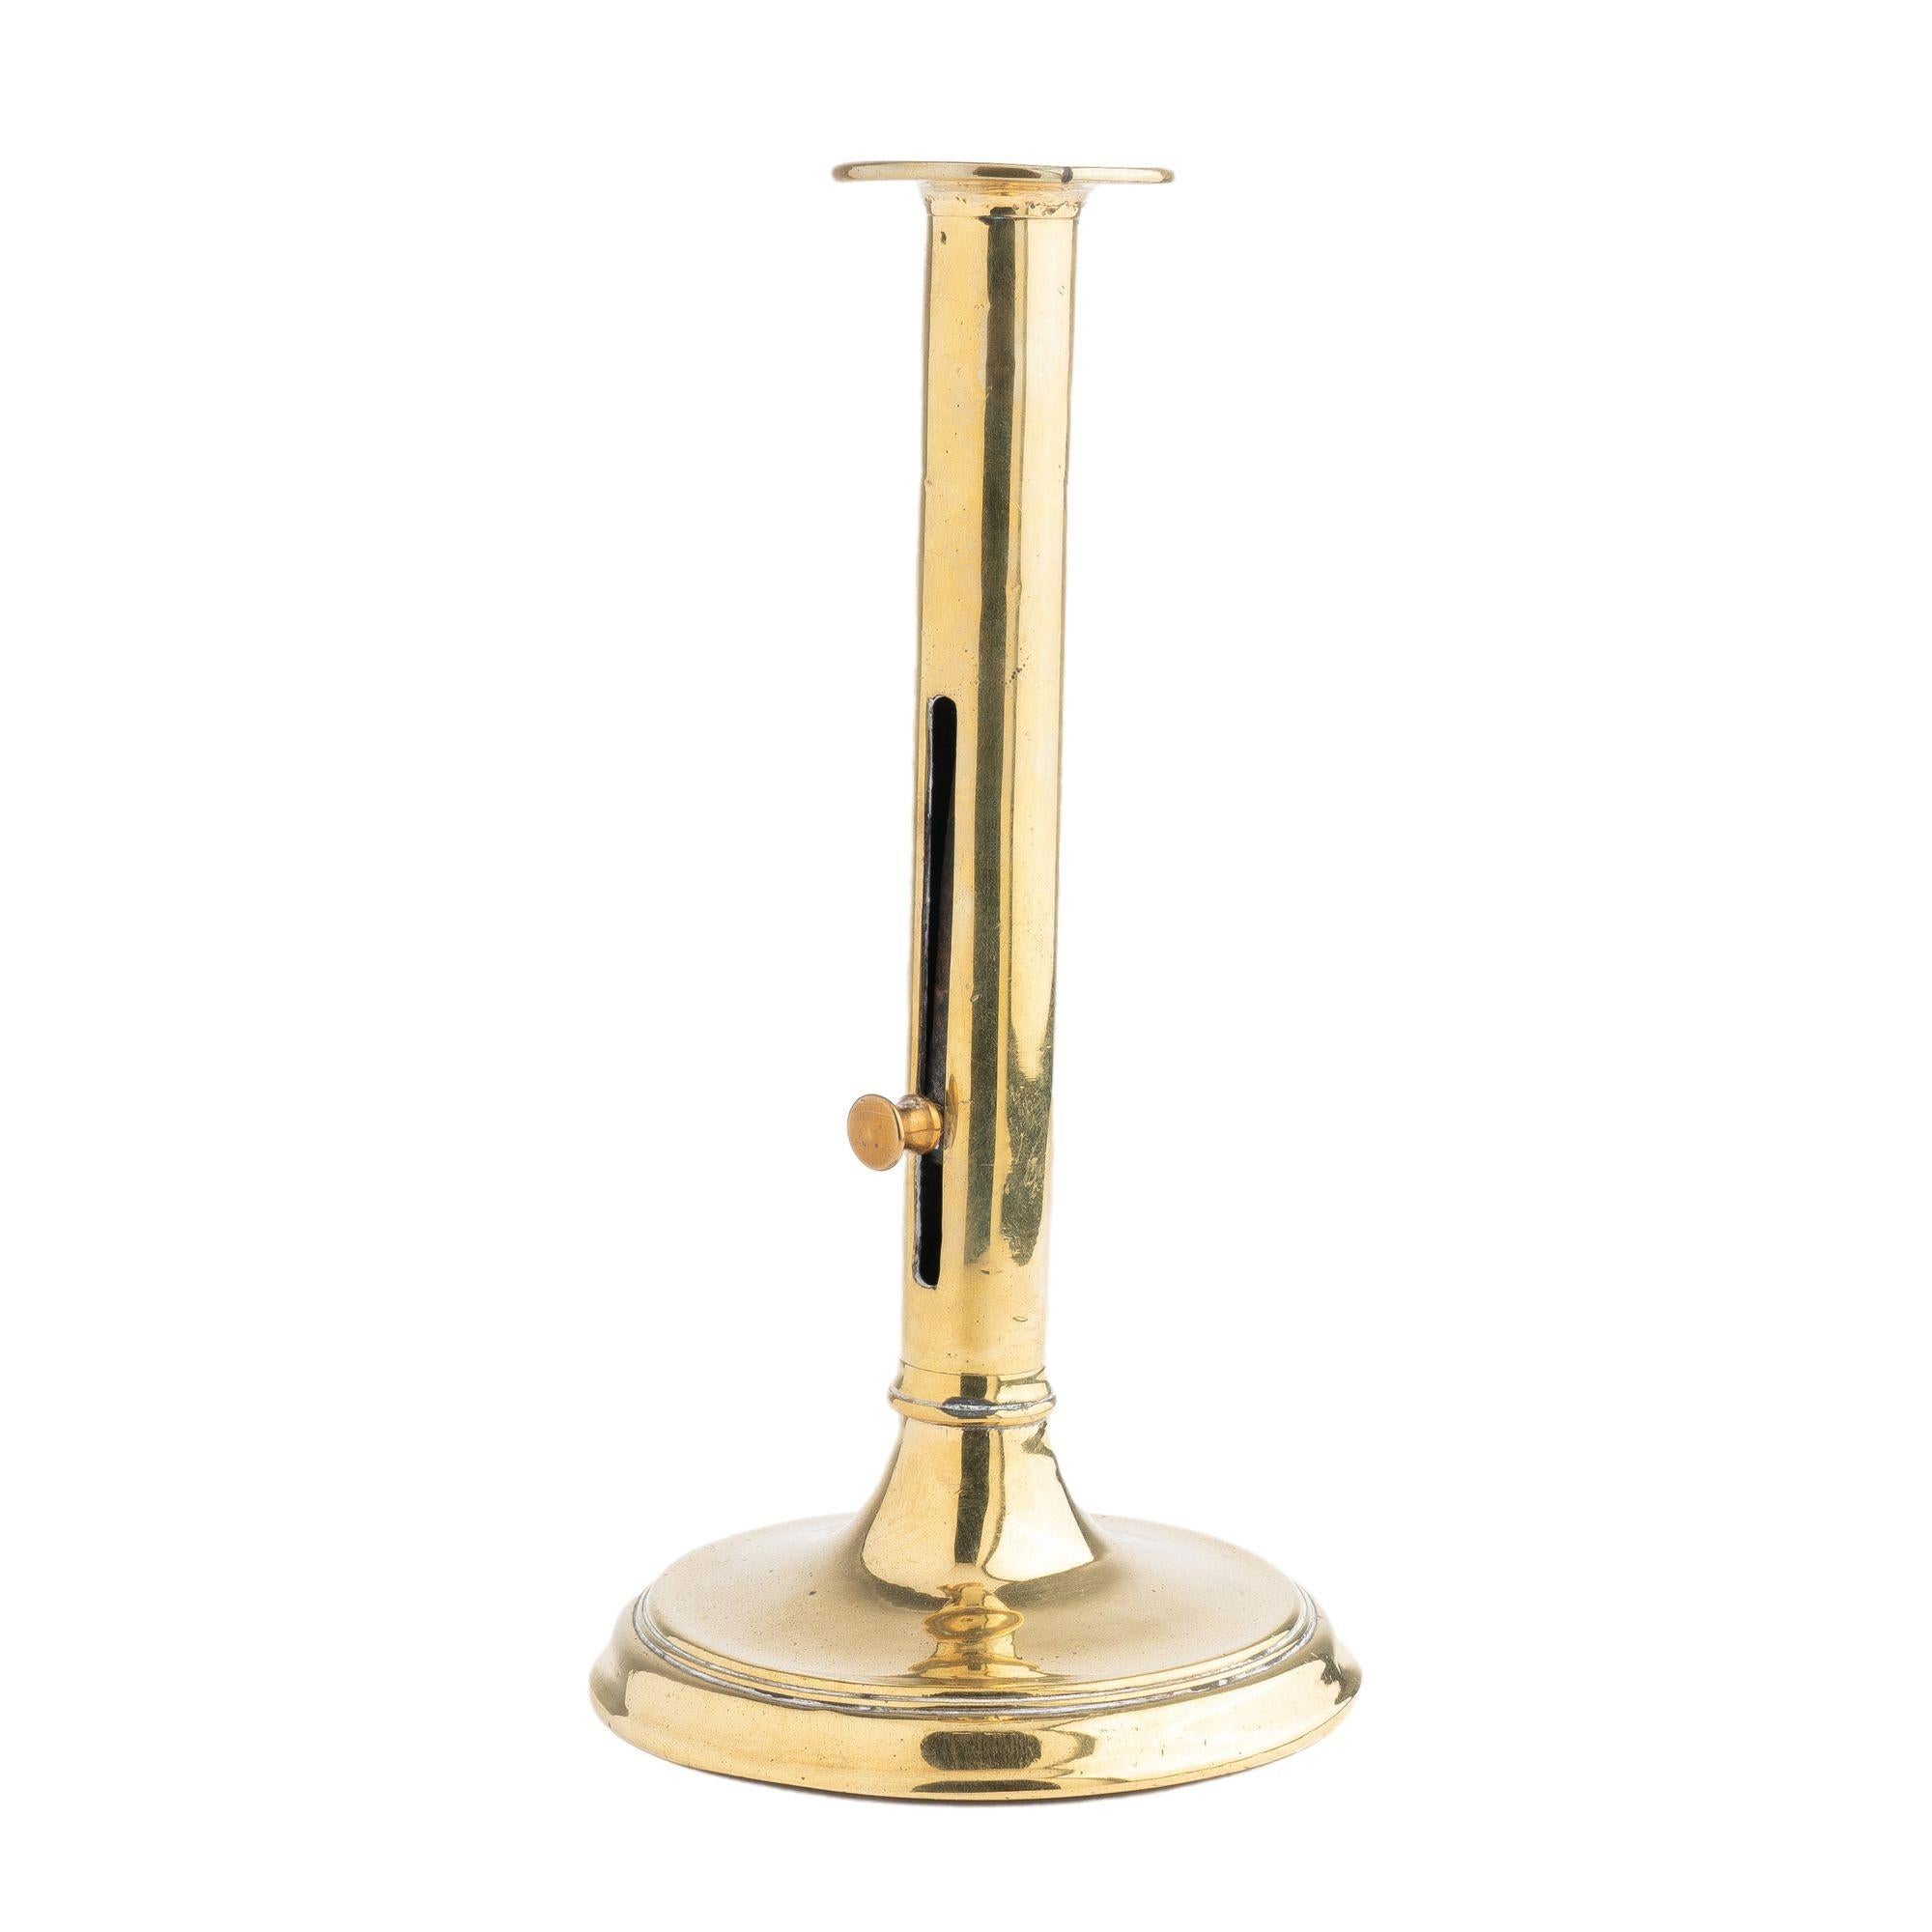 Cast brass cannon barrel candle stick with side, brass knob, and candle ejector. The cylinder shaft of the candlestick is peened to a raised circular base with dished drip pan detailed with a beaded rim.

England, circa 1820.